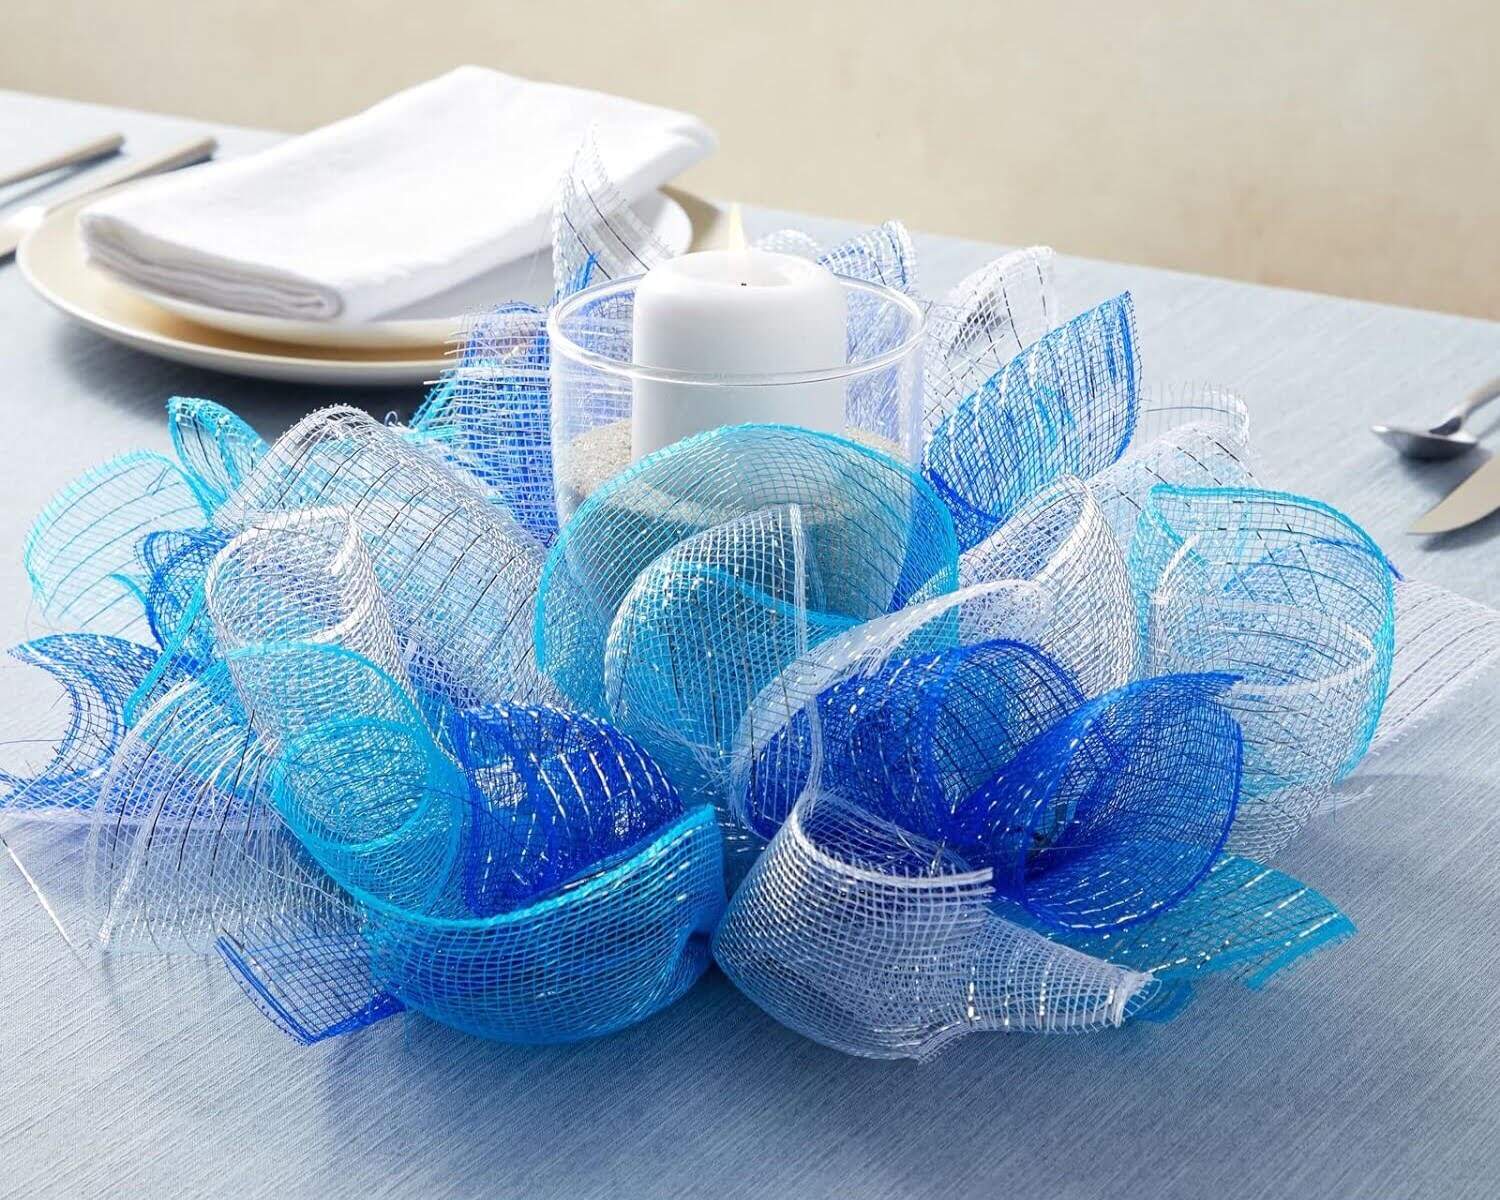 How To Make A Deco Mesh Table Centerpiece